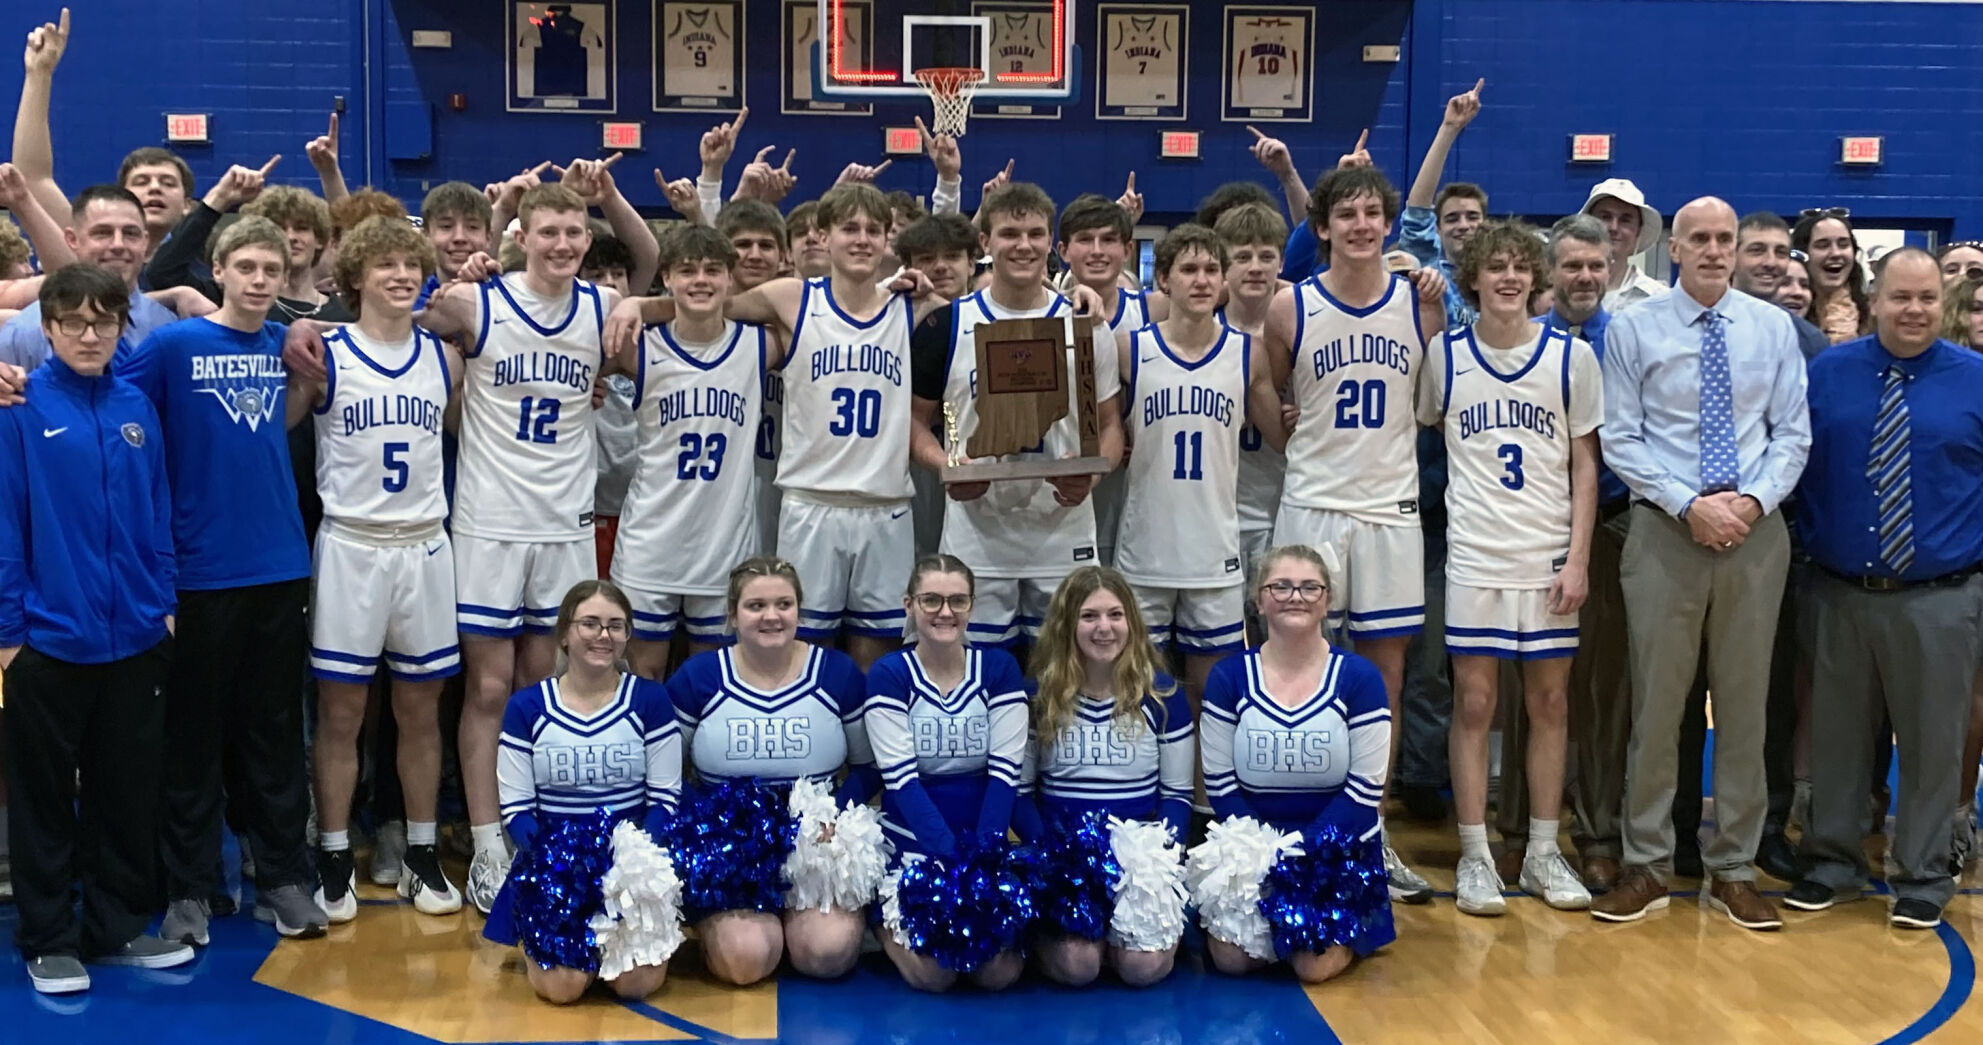 Batesville Bulldogs Secure Sectional Title with Victory Over Lawrenceburg Tigers